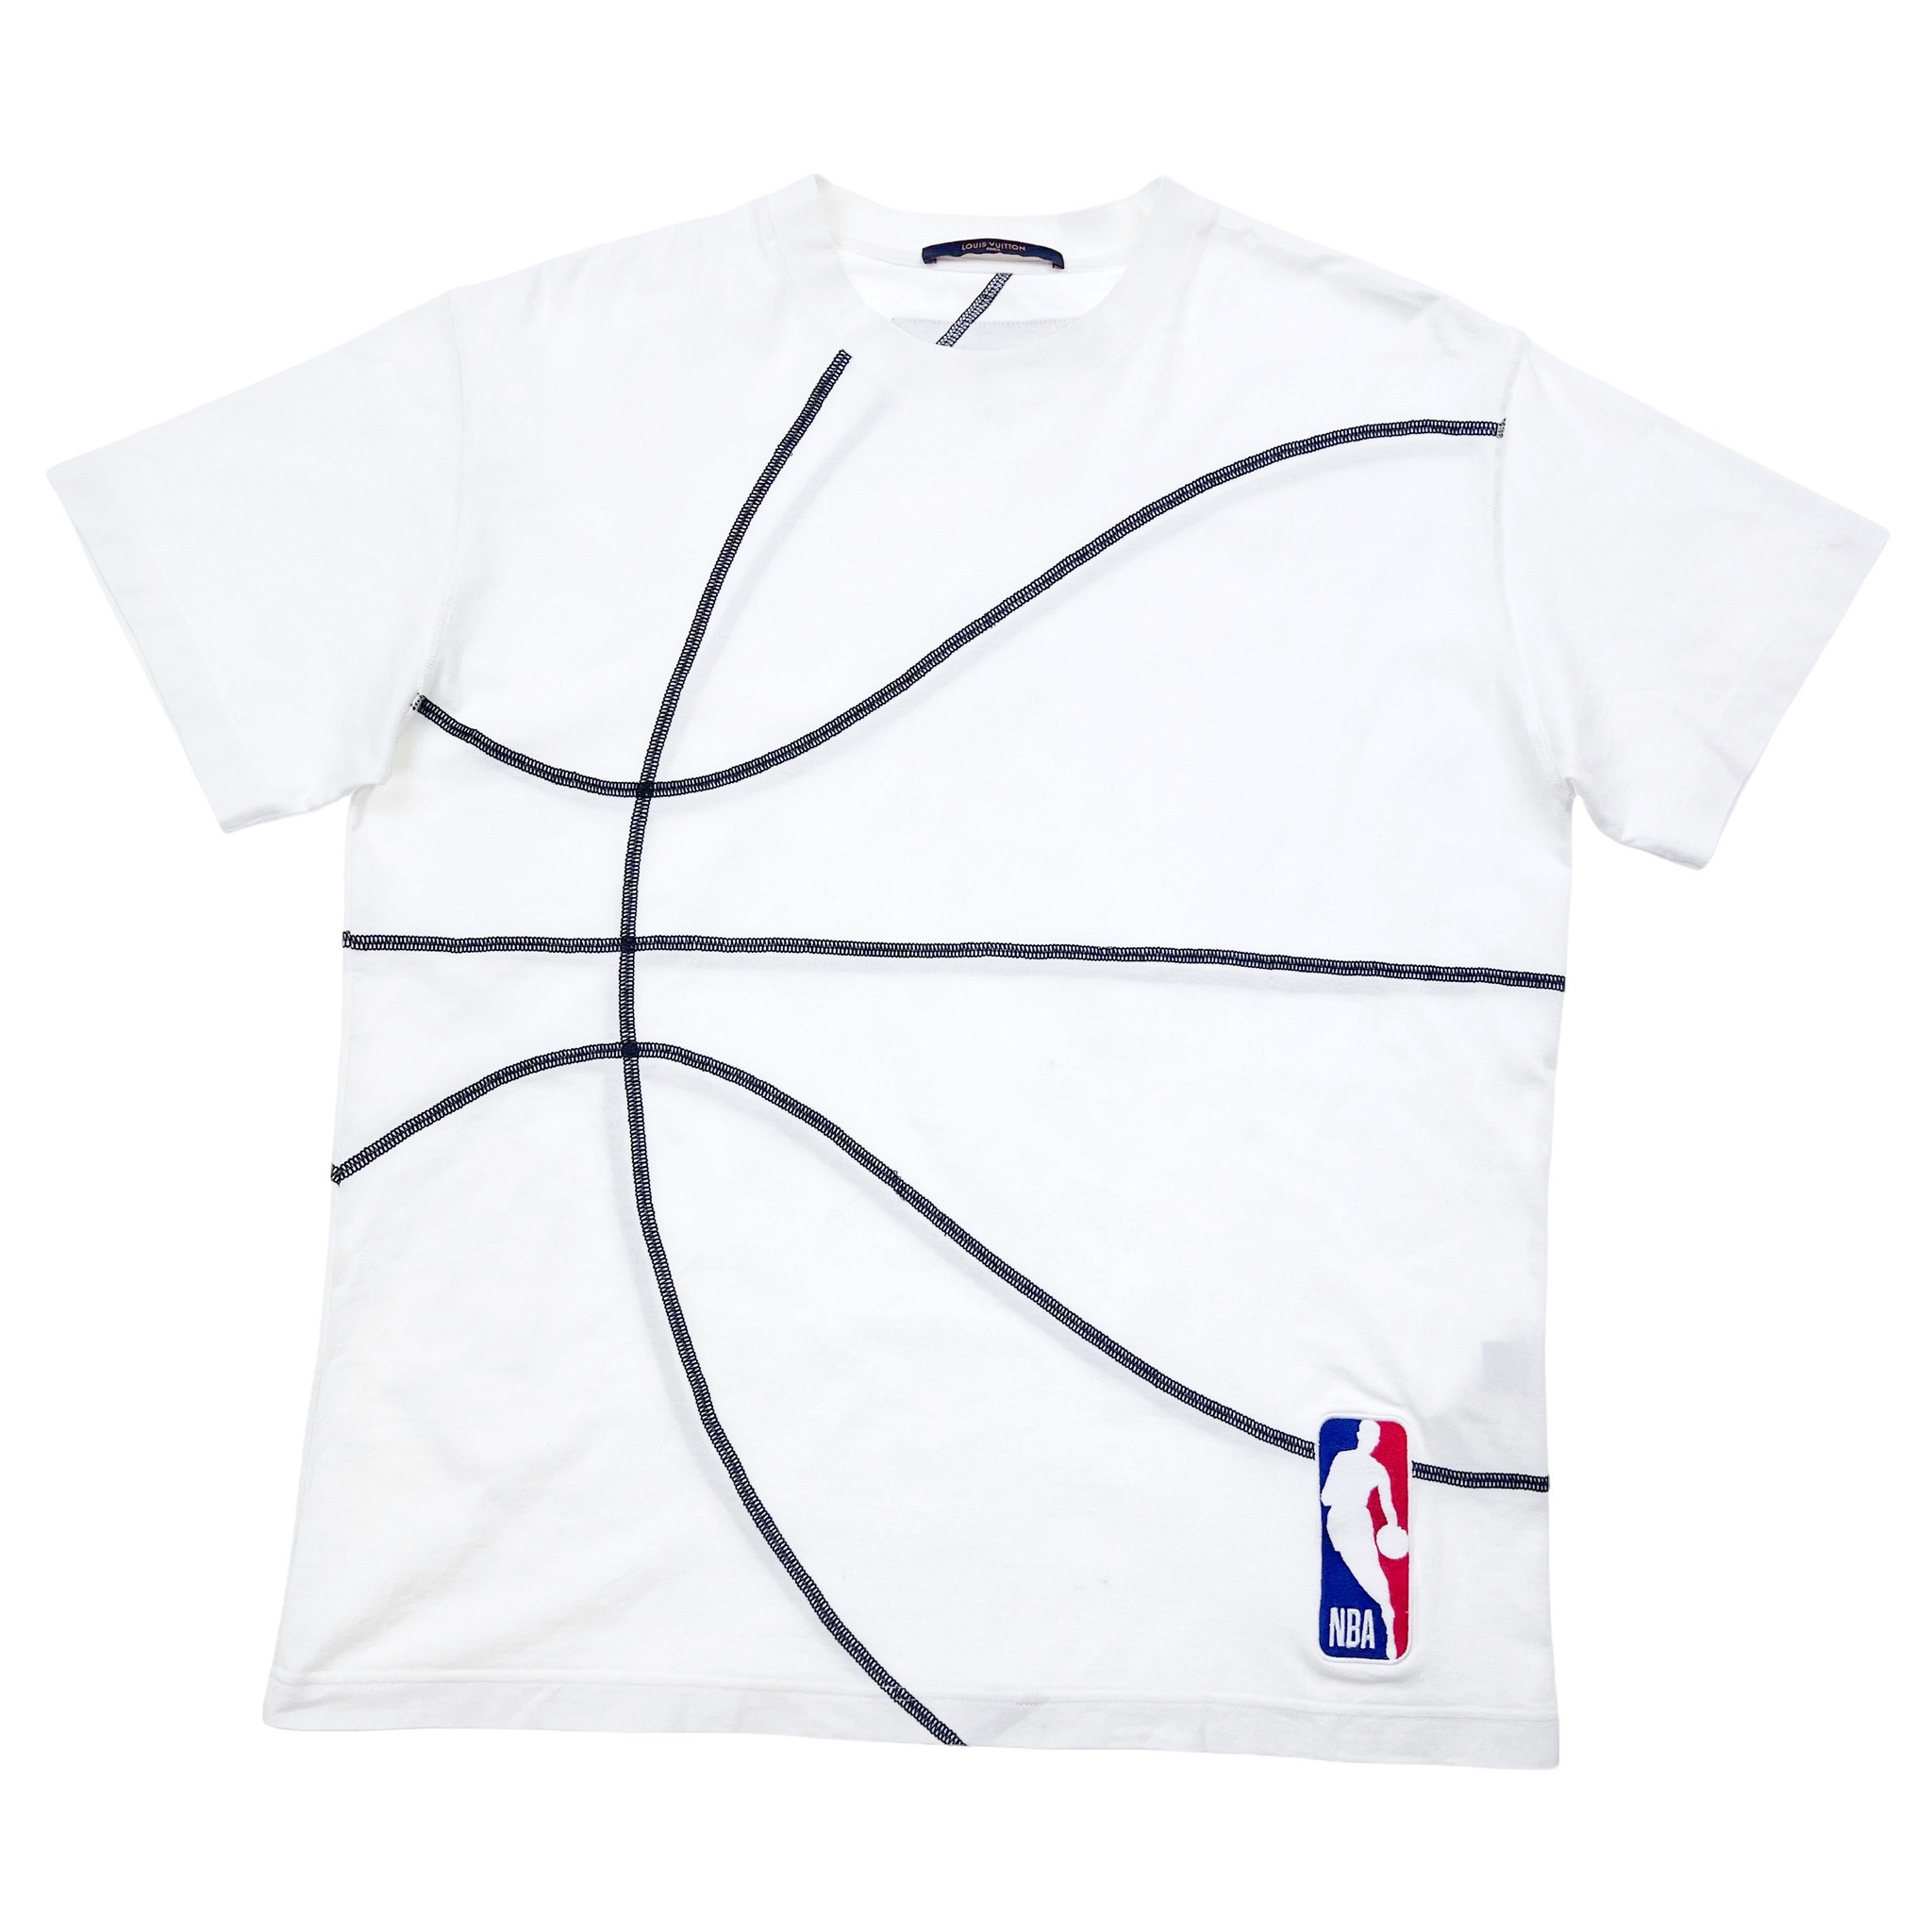 Louis Vuitton x NBA Embroidered T Shirt - Oliver's Archive